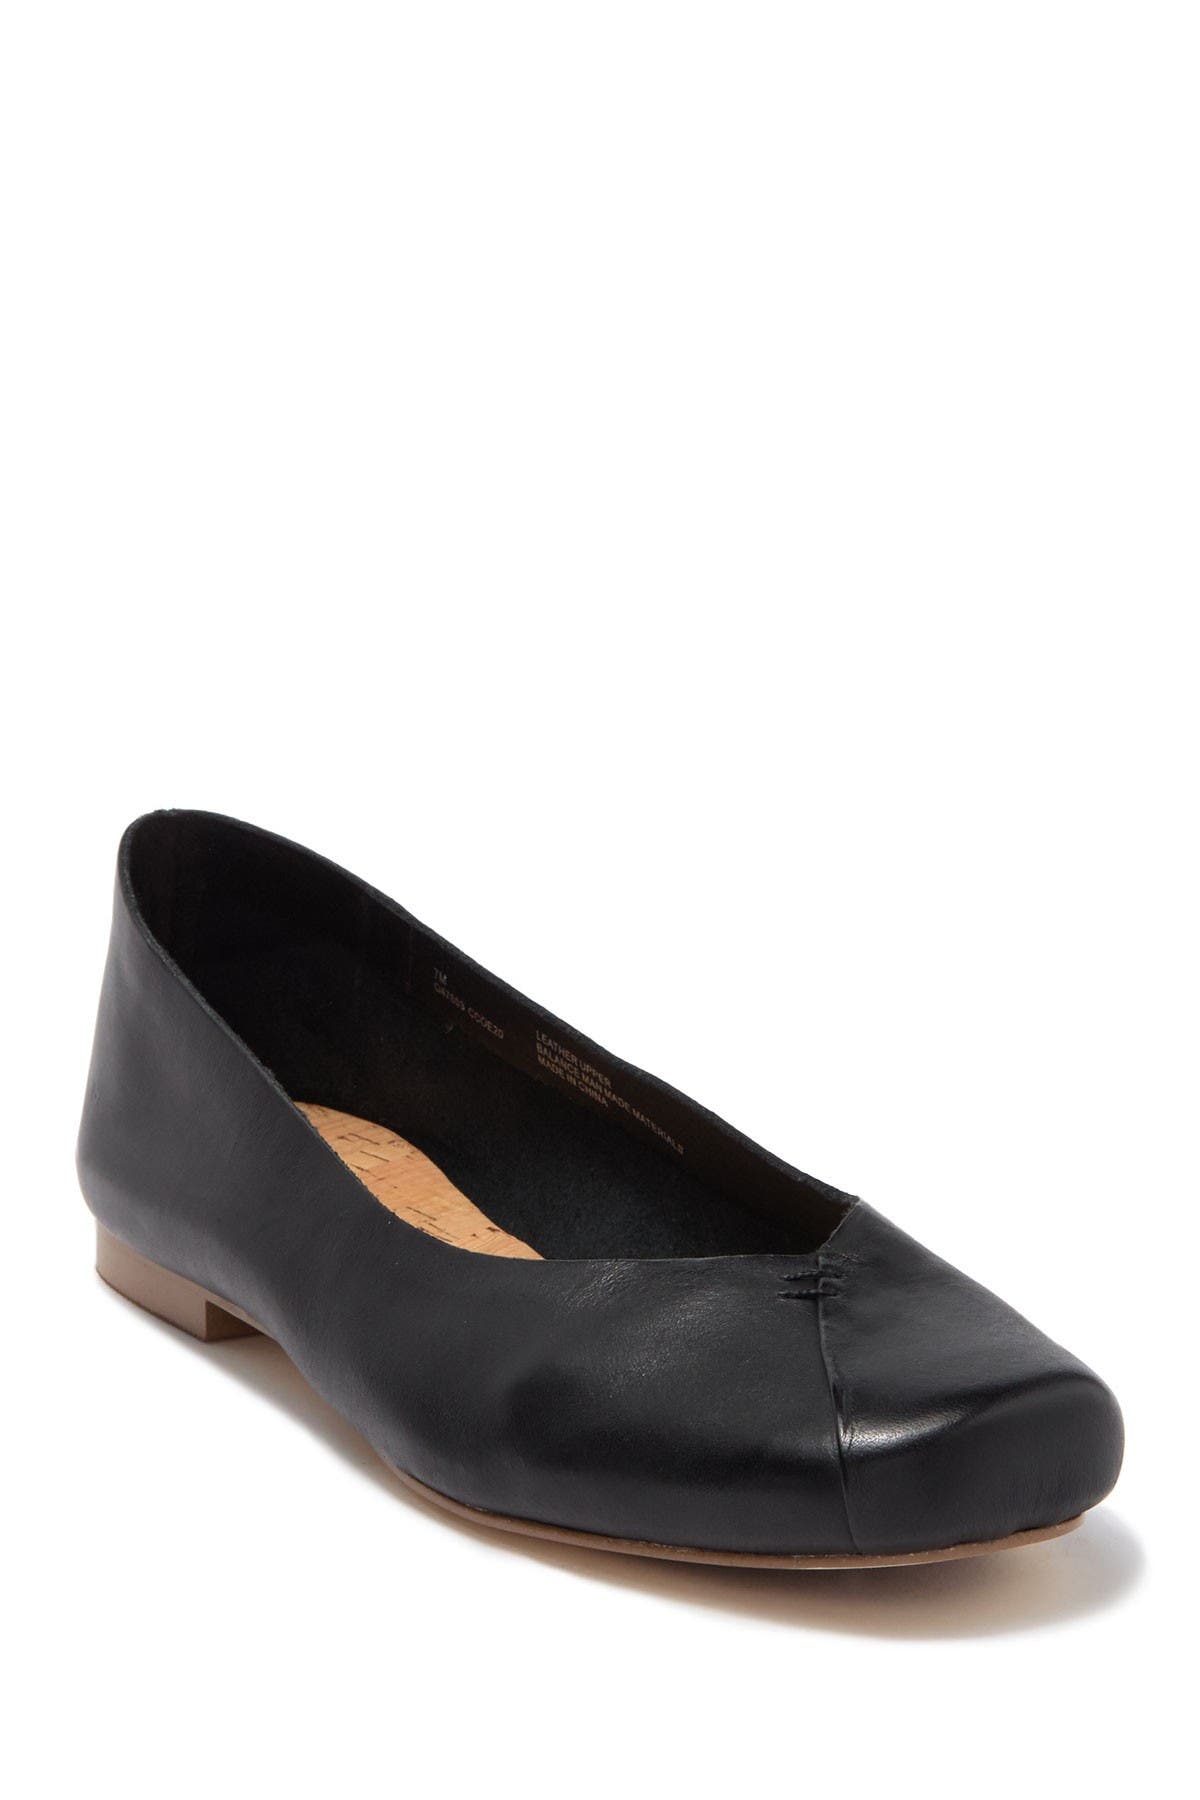 Flats for Women Clearance | Nordstrom Rack